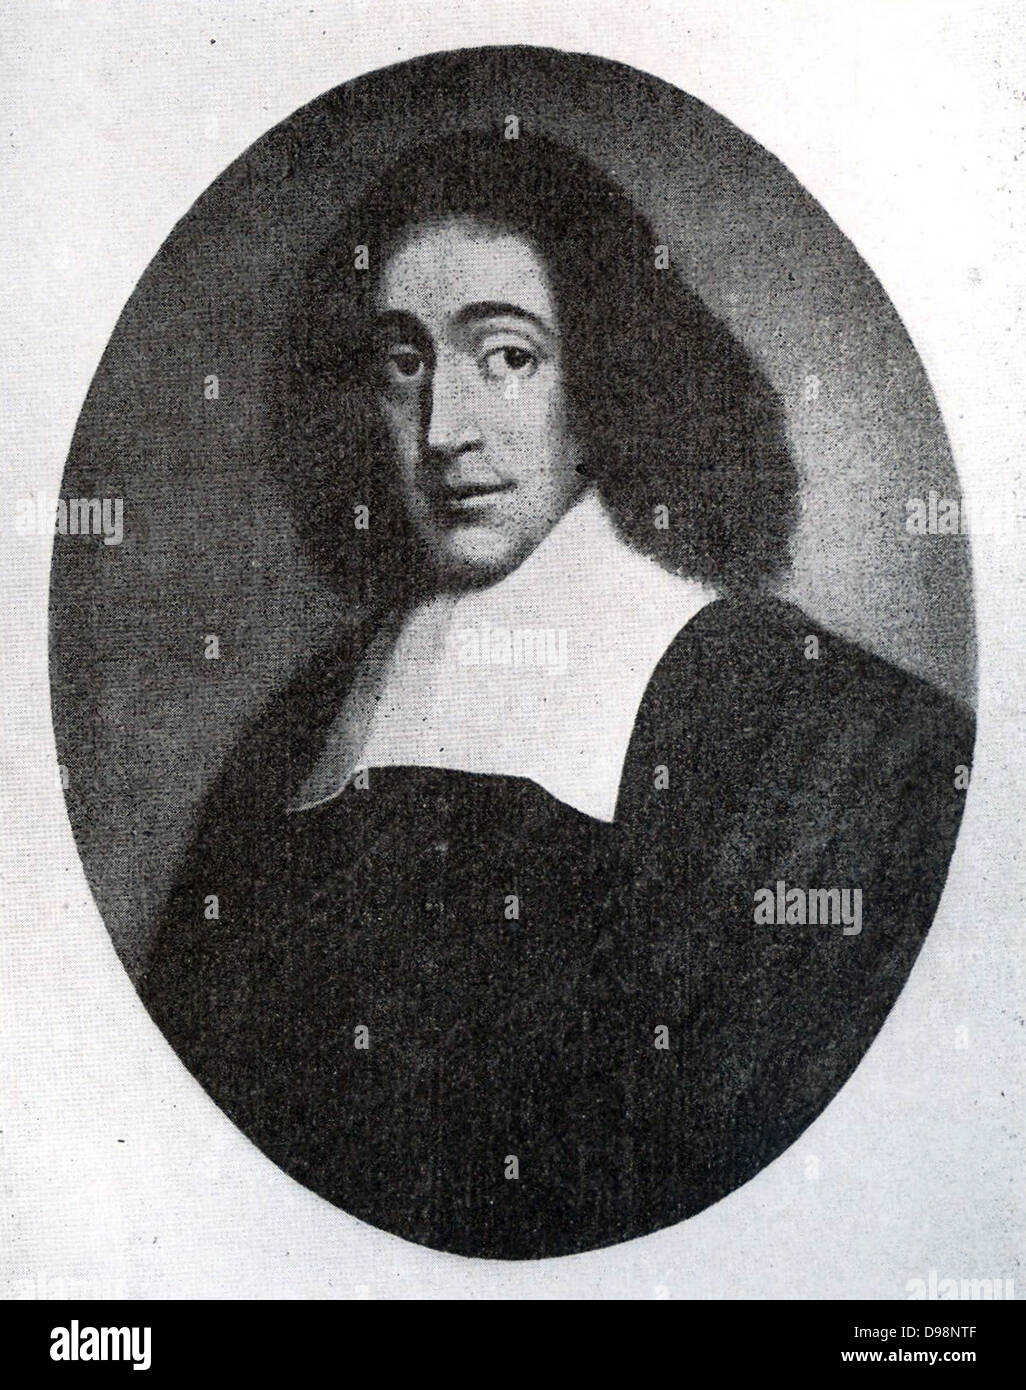 Baruch Despinoza 1632-1677.  Dutch Jewish philosopher, a major exponent of 17th century rationalism.  His father and grandfather fled persecution by the Inquisition in Porugal. His early interest in new scientific and philosophical ideas led to his expulsion from the synagogue in 1656.  He made is living as a lens grinder and polisher. His books were put on the Catholic Church's Index of forbidden books. Stock Photo